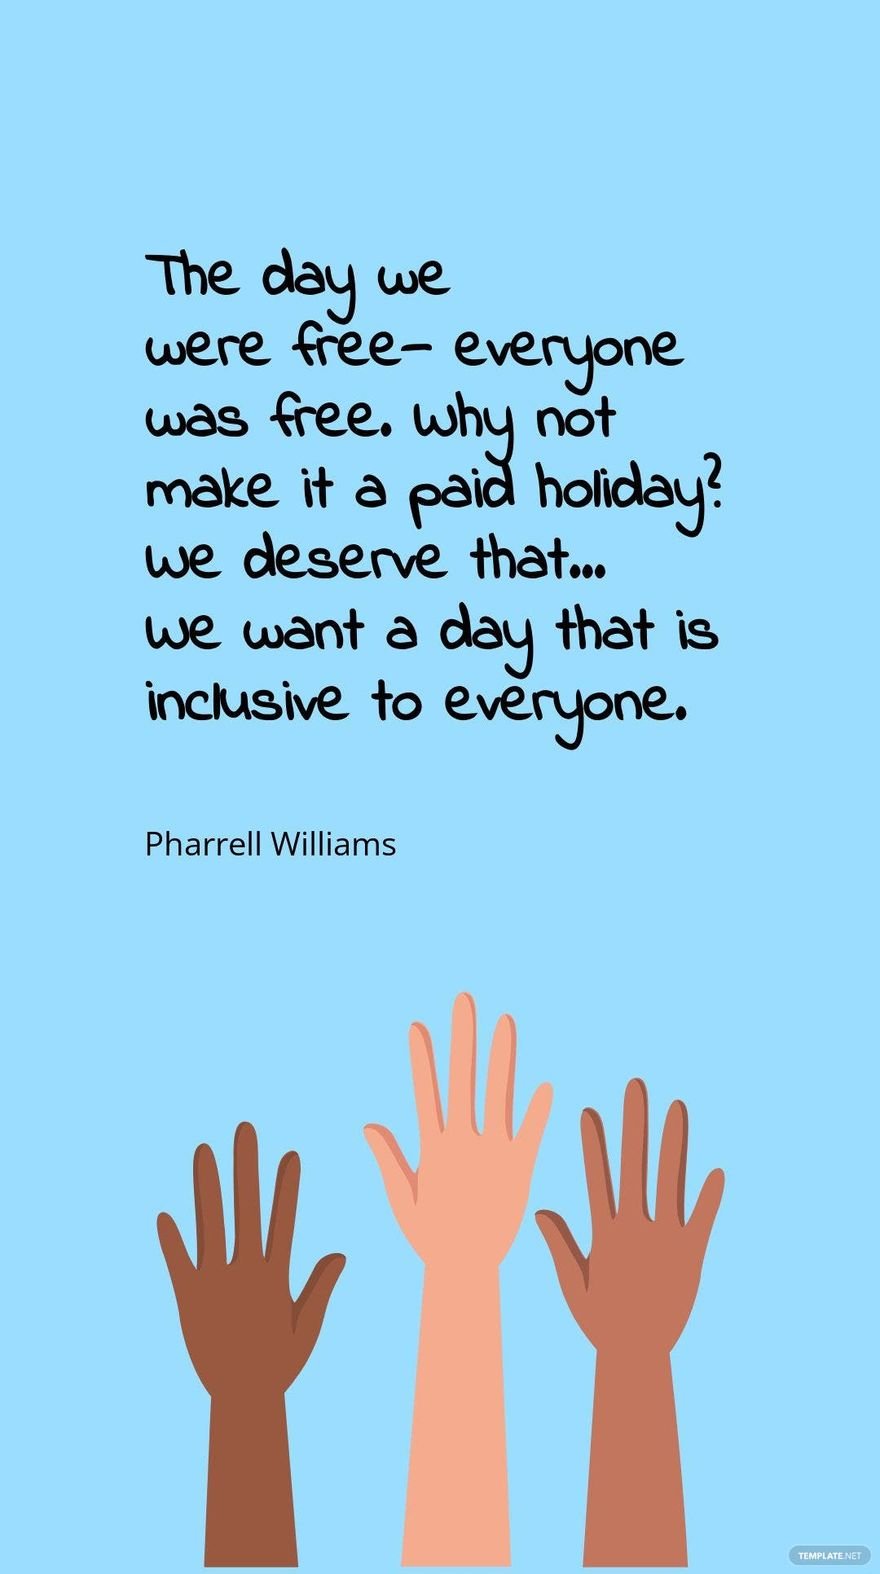 Pharrell Williams - The day we were free—everyone was free. Why not make it a paid holiday? We deserve that…We want a day that is inclusive to everyone.